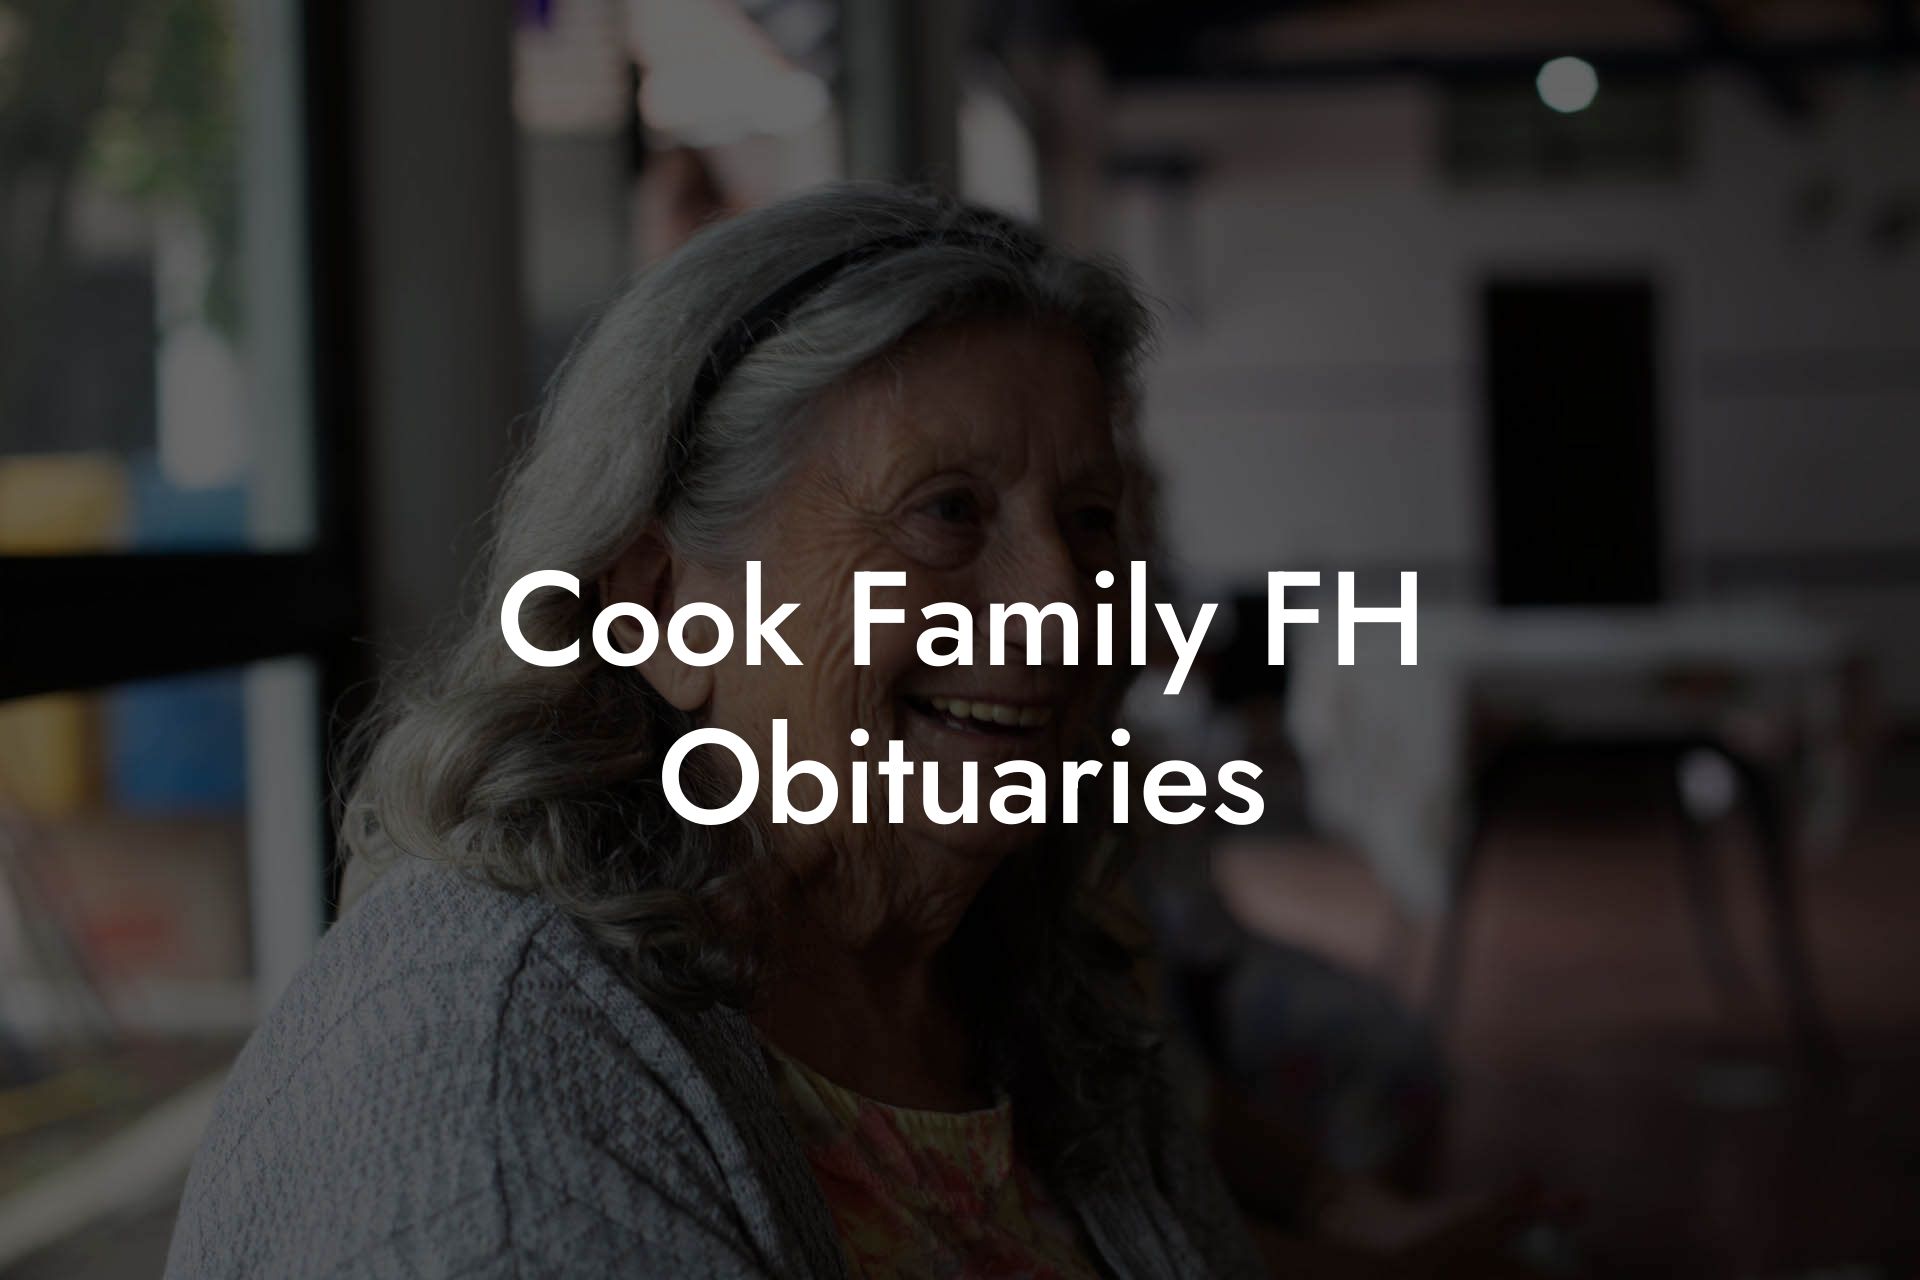 Cook Family FH Obituaries